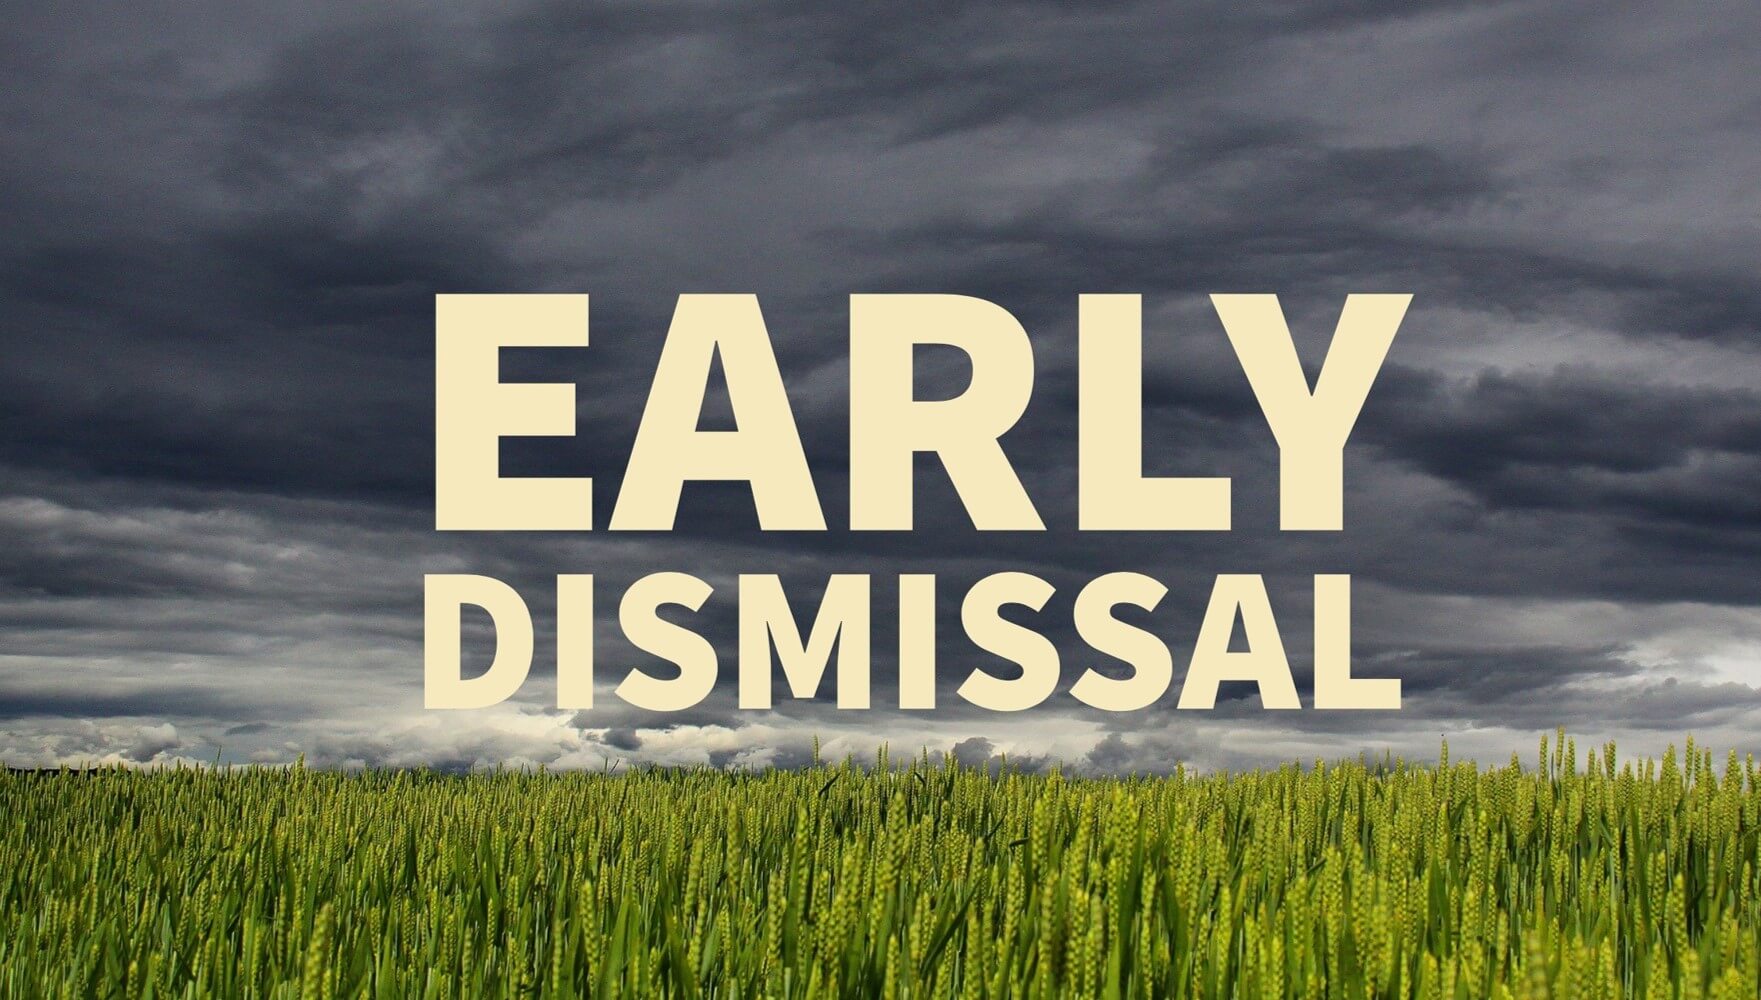 Breaking: Tippah County schools to dismiss early due to threat of severe weather